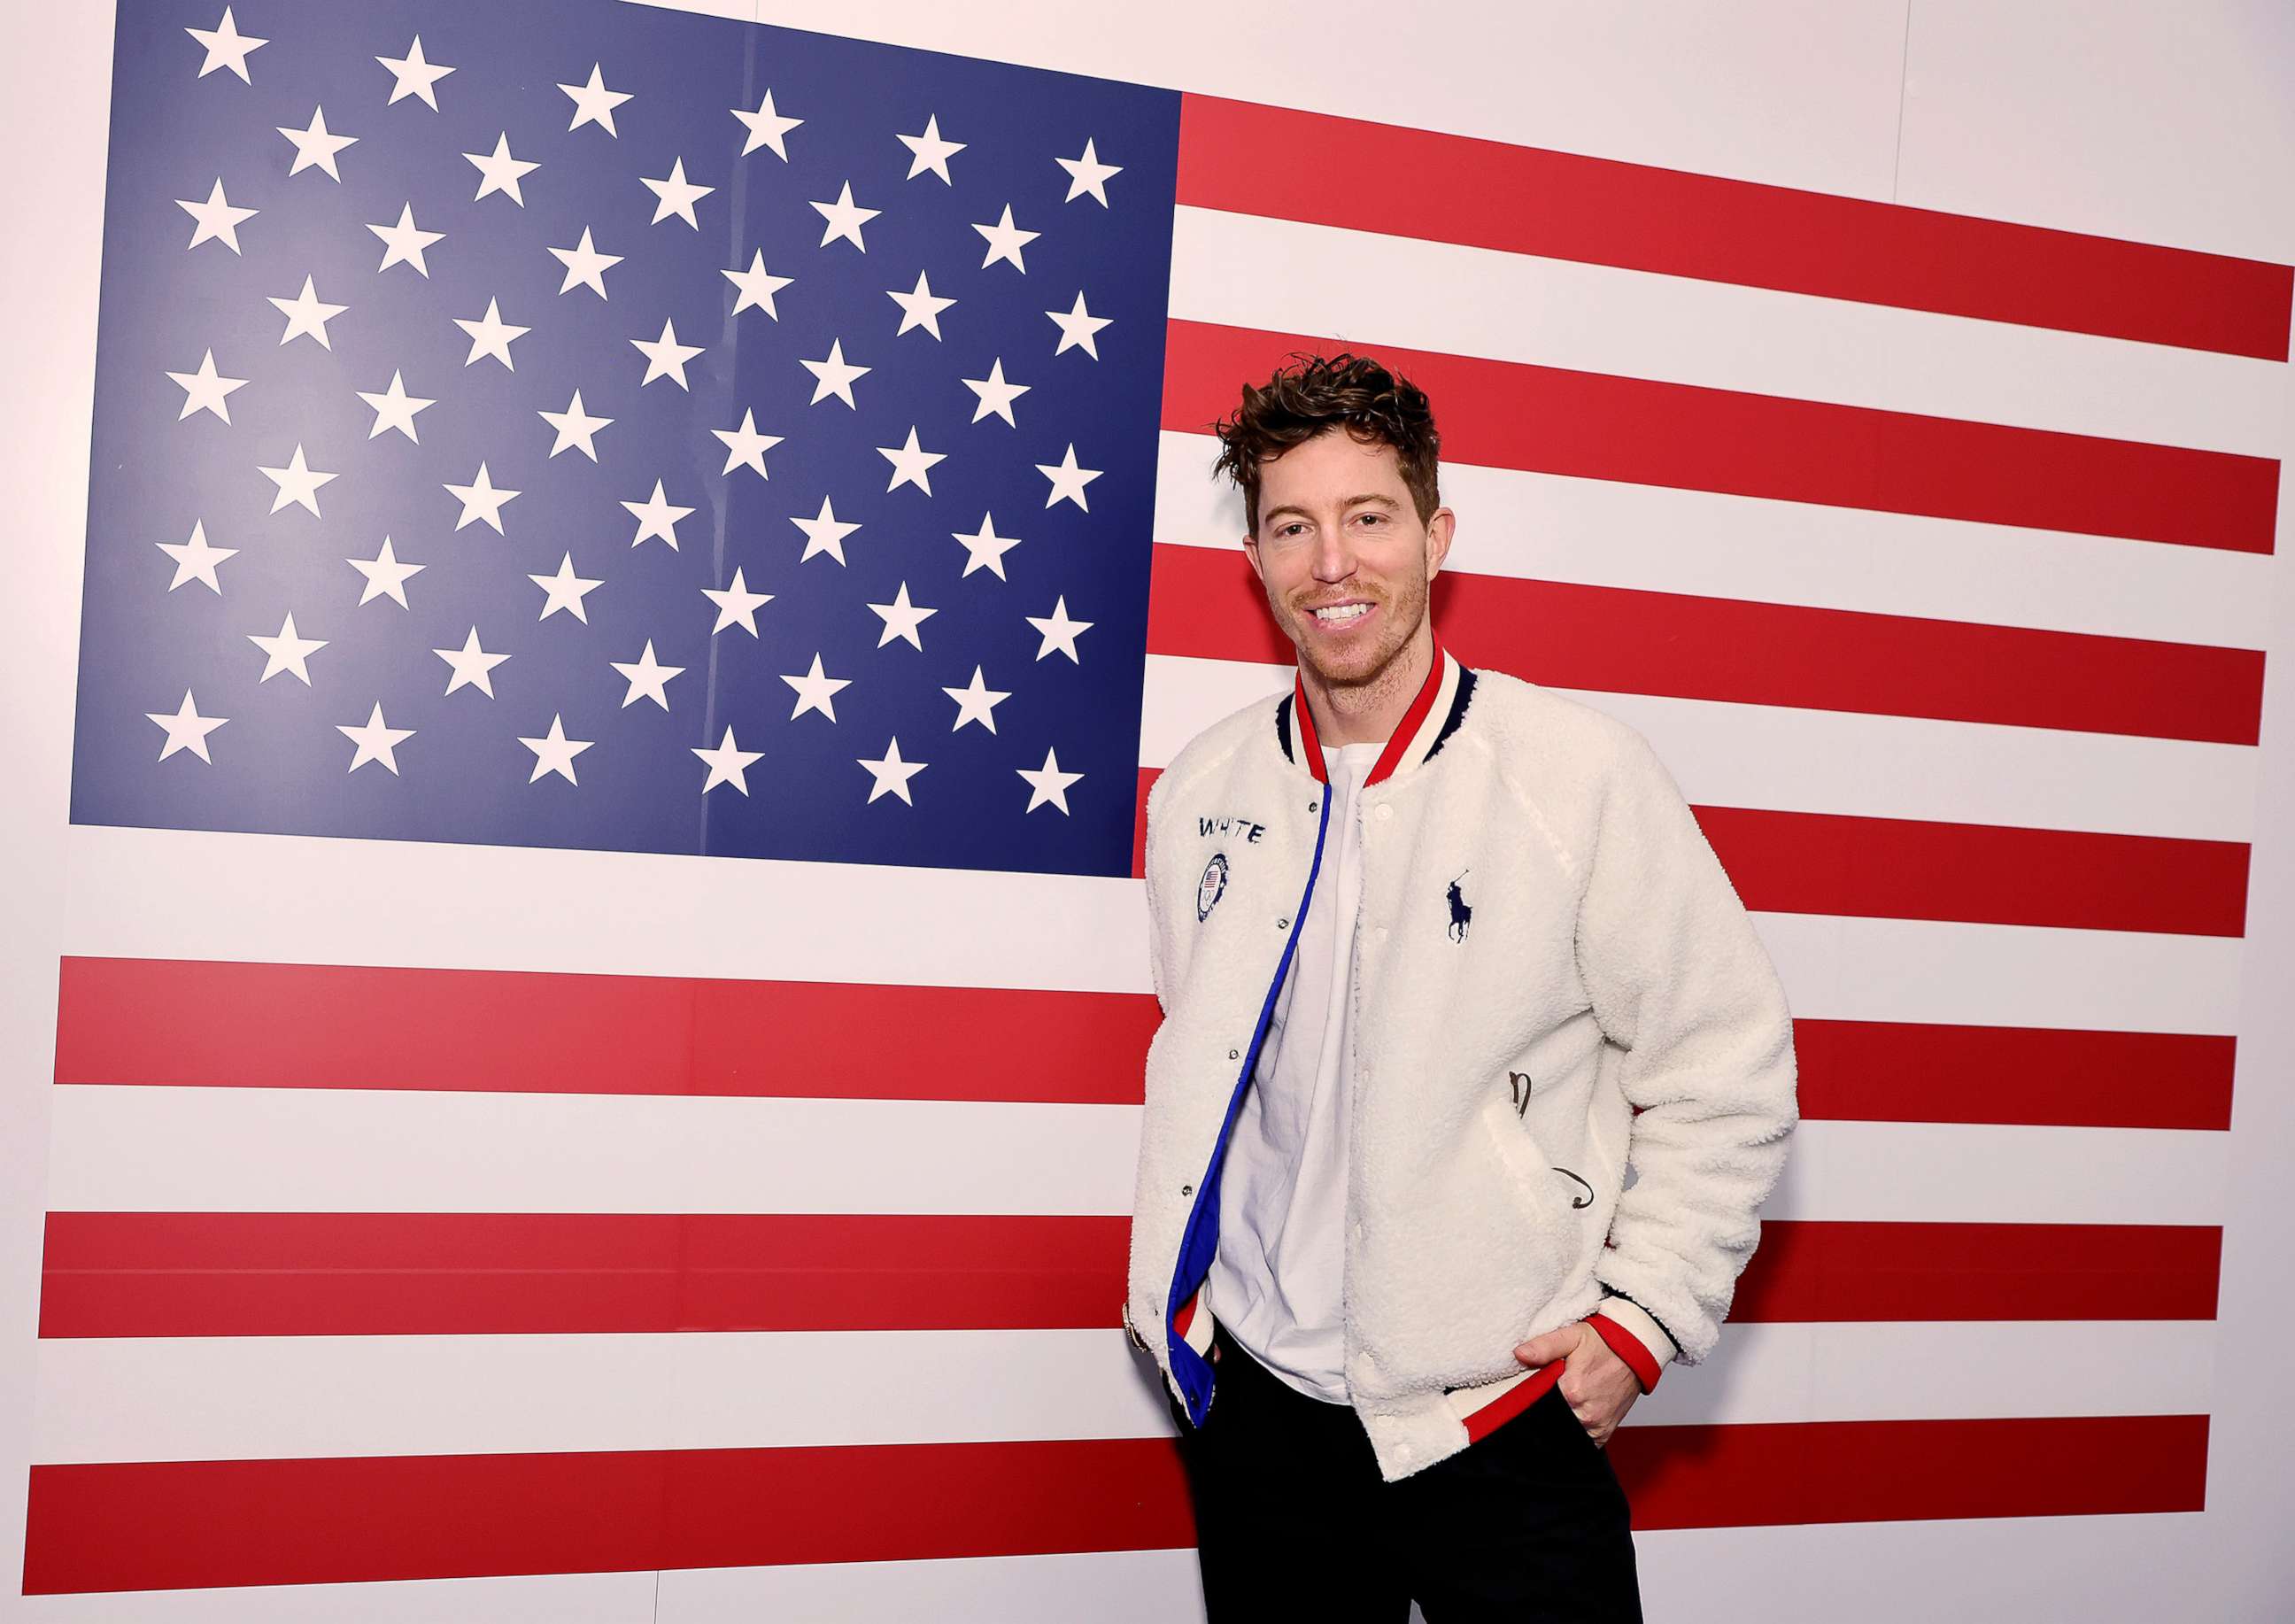 Shaun White Ends His Olympic Career With 4th Place Finish - The